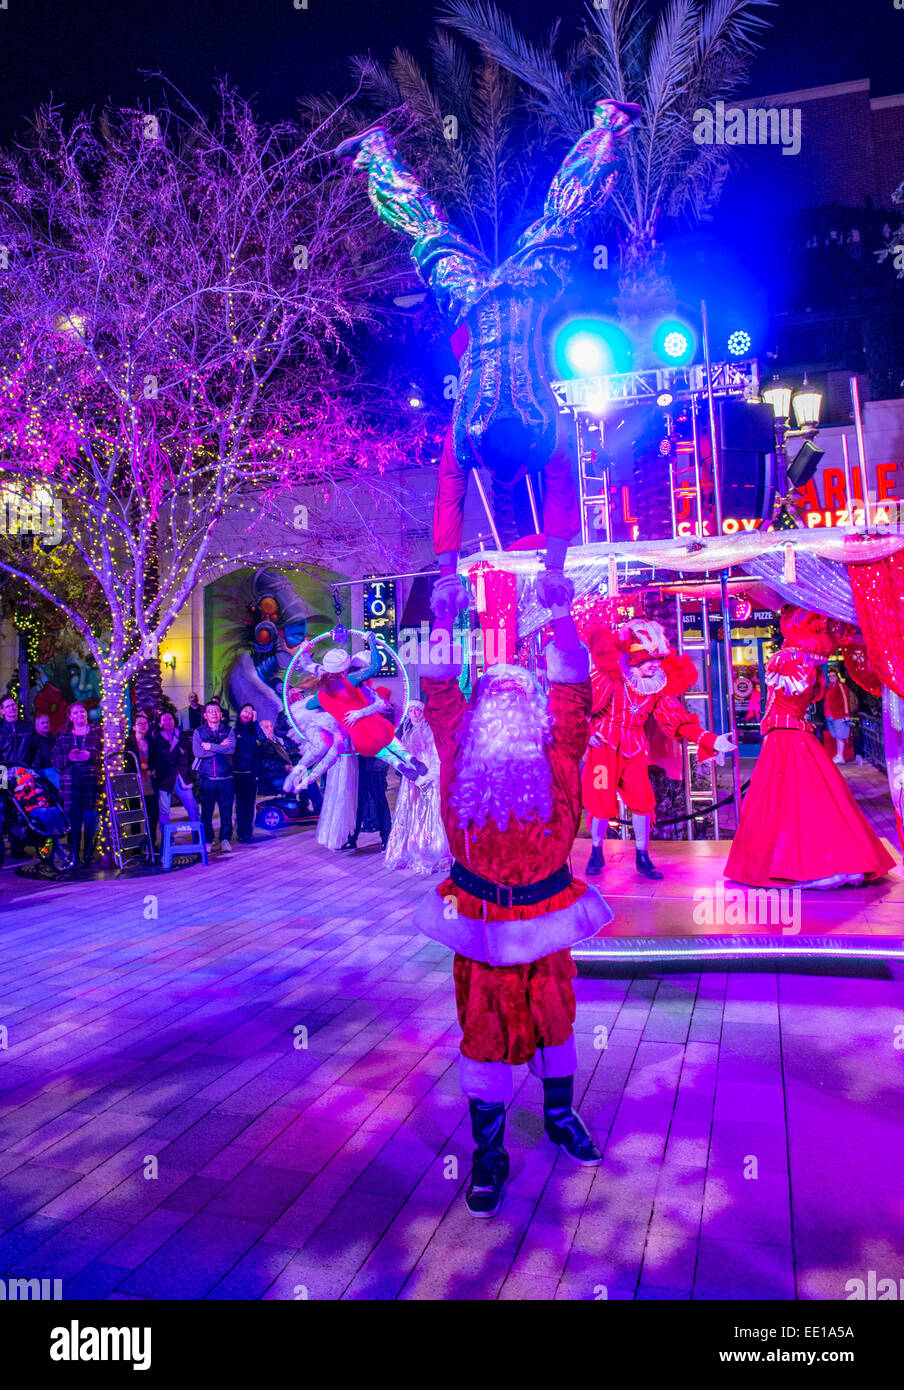 Winter parq show at the Linq in Las Vegas Stock Photo